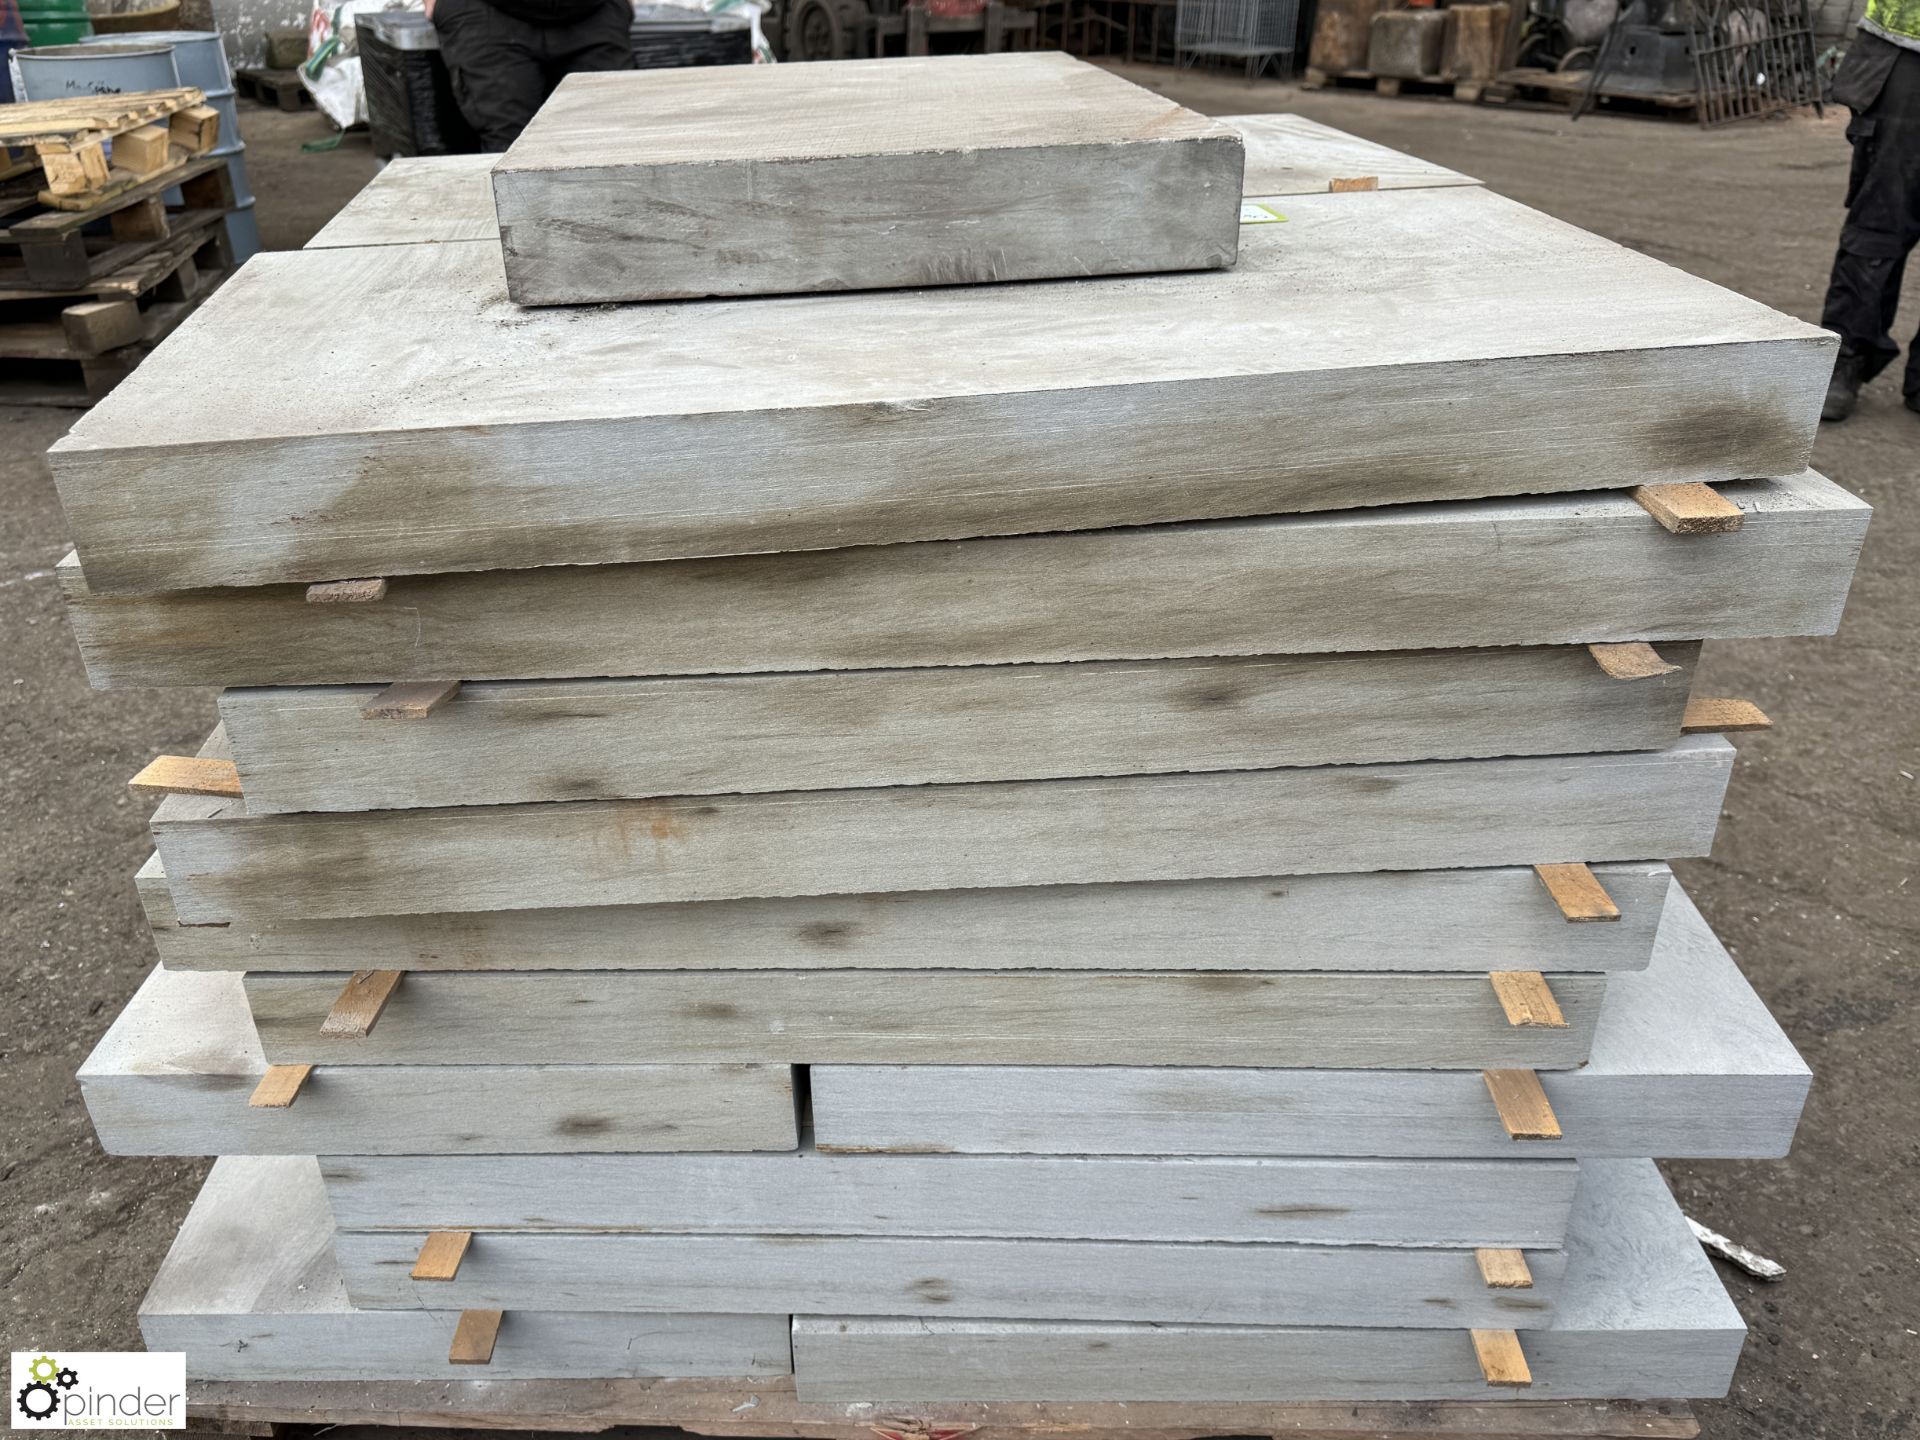 Pallet Sandstone Slabs from Millstone grit, various lengths x 450mm x 75mm - Image 2 of 6